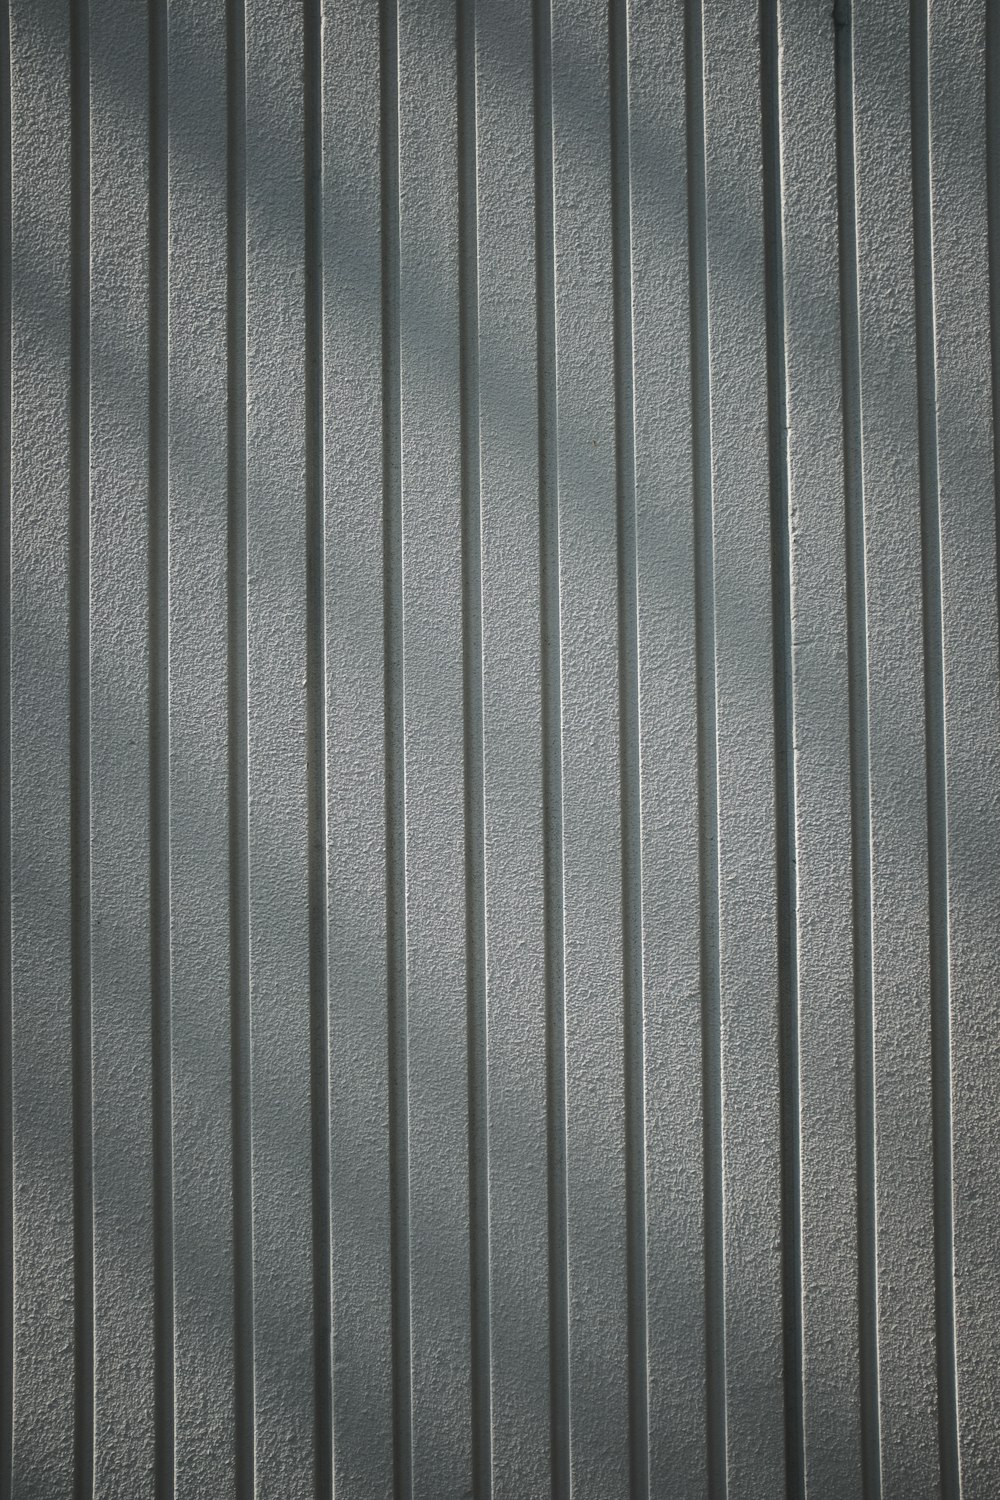 black and gray striped textile